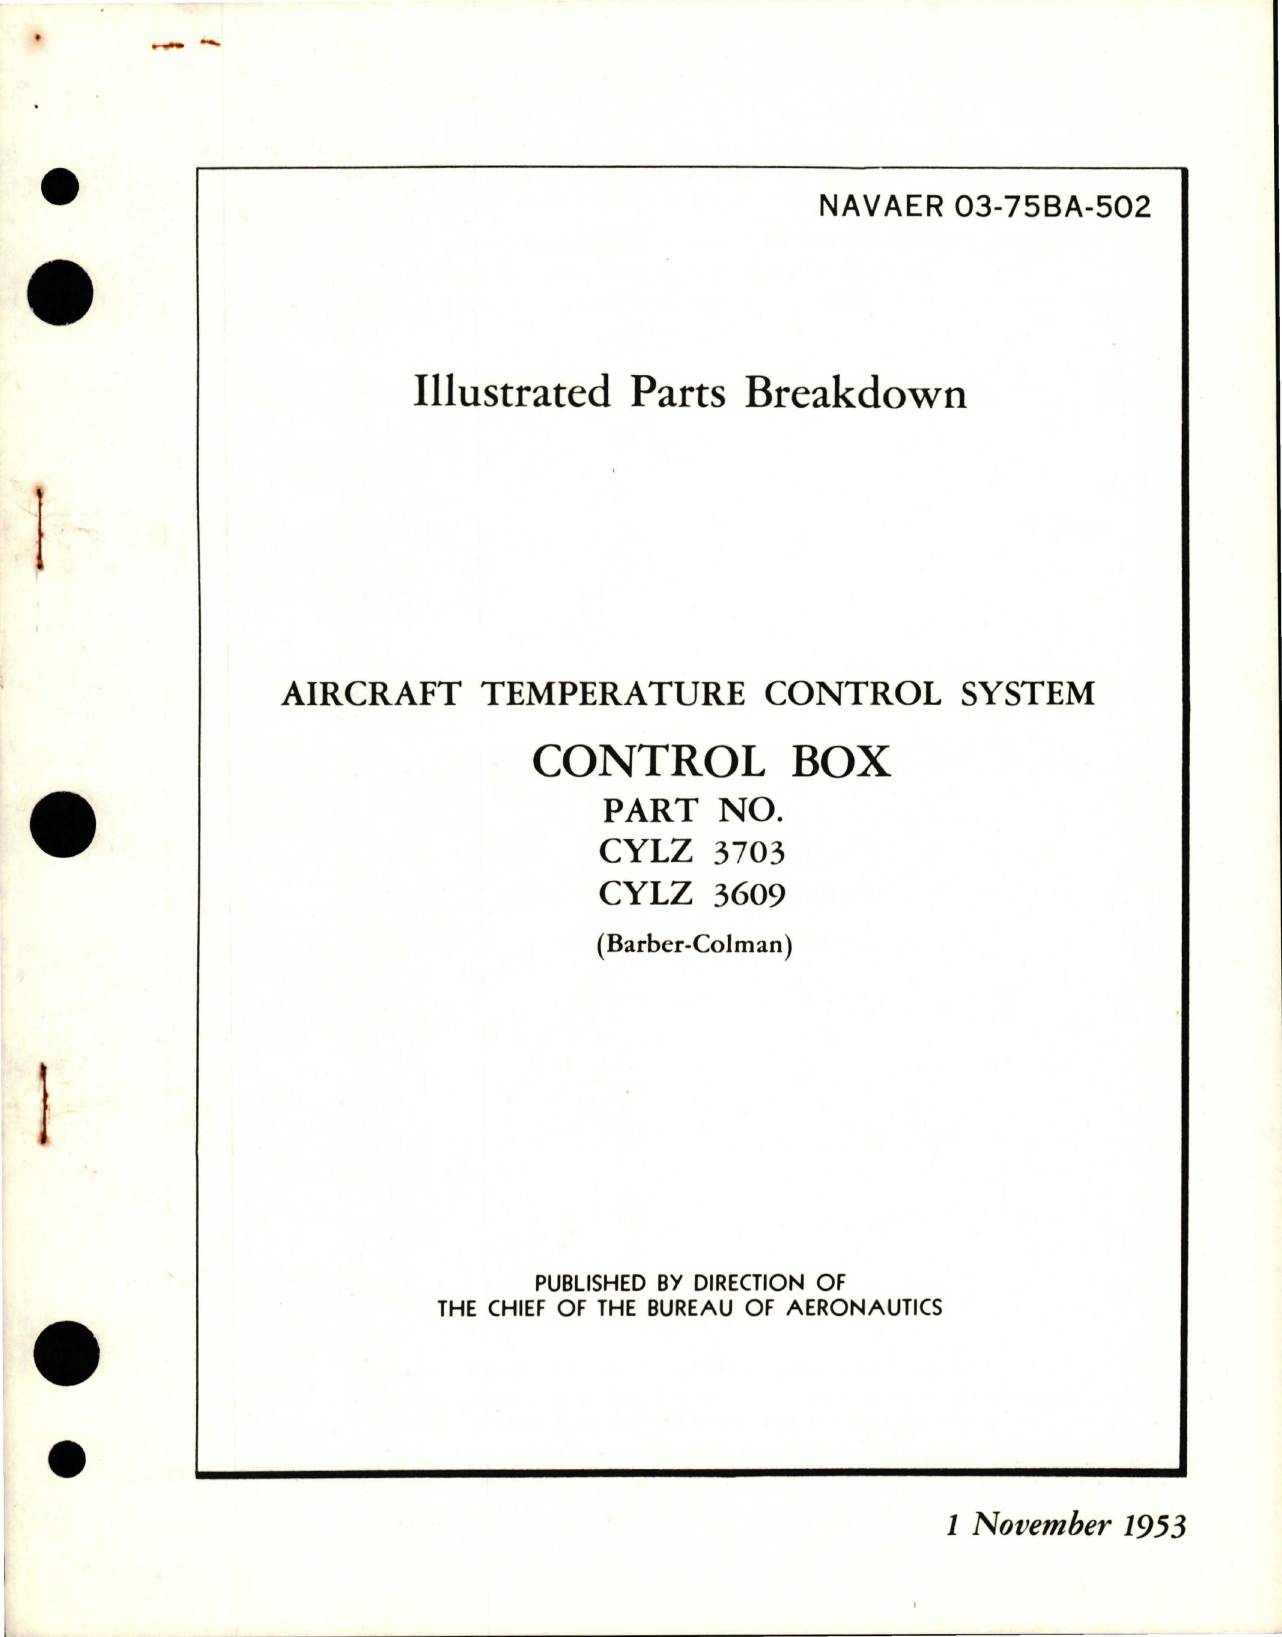 Sample page 1 from AirCorps Library document: Illustrated Parts Breakdown for Aircraft Temperature Control System Control Box, Parts CYLZ 3703 and CYLZ 3609